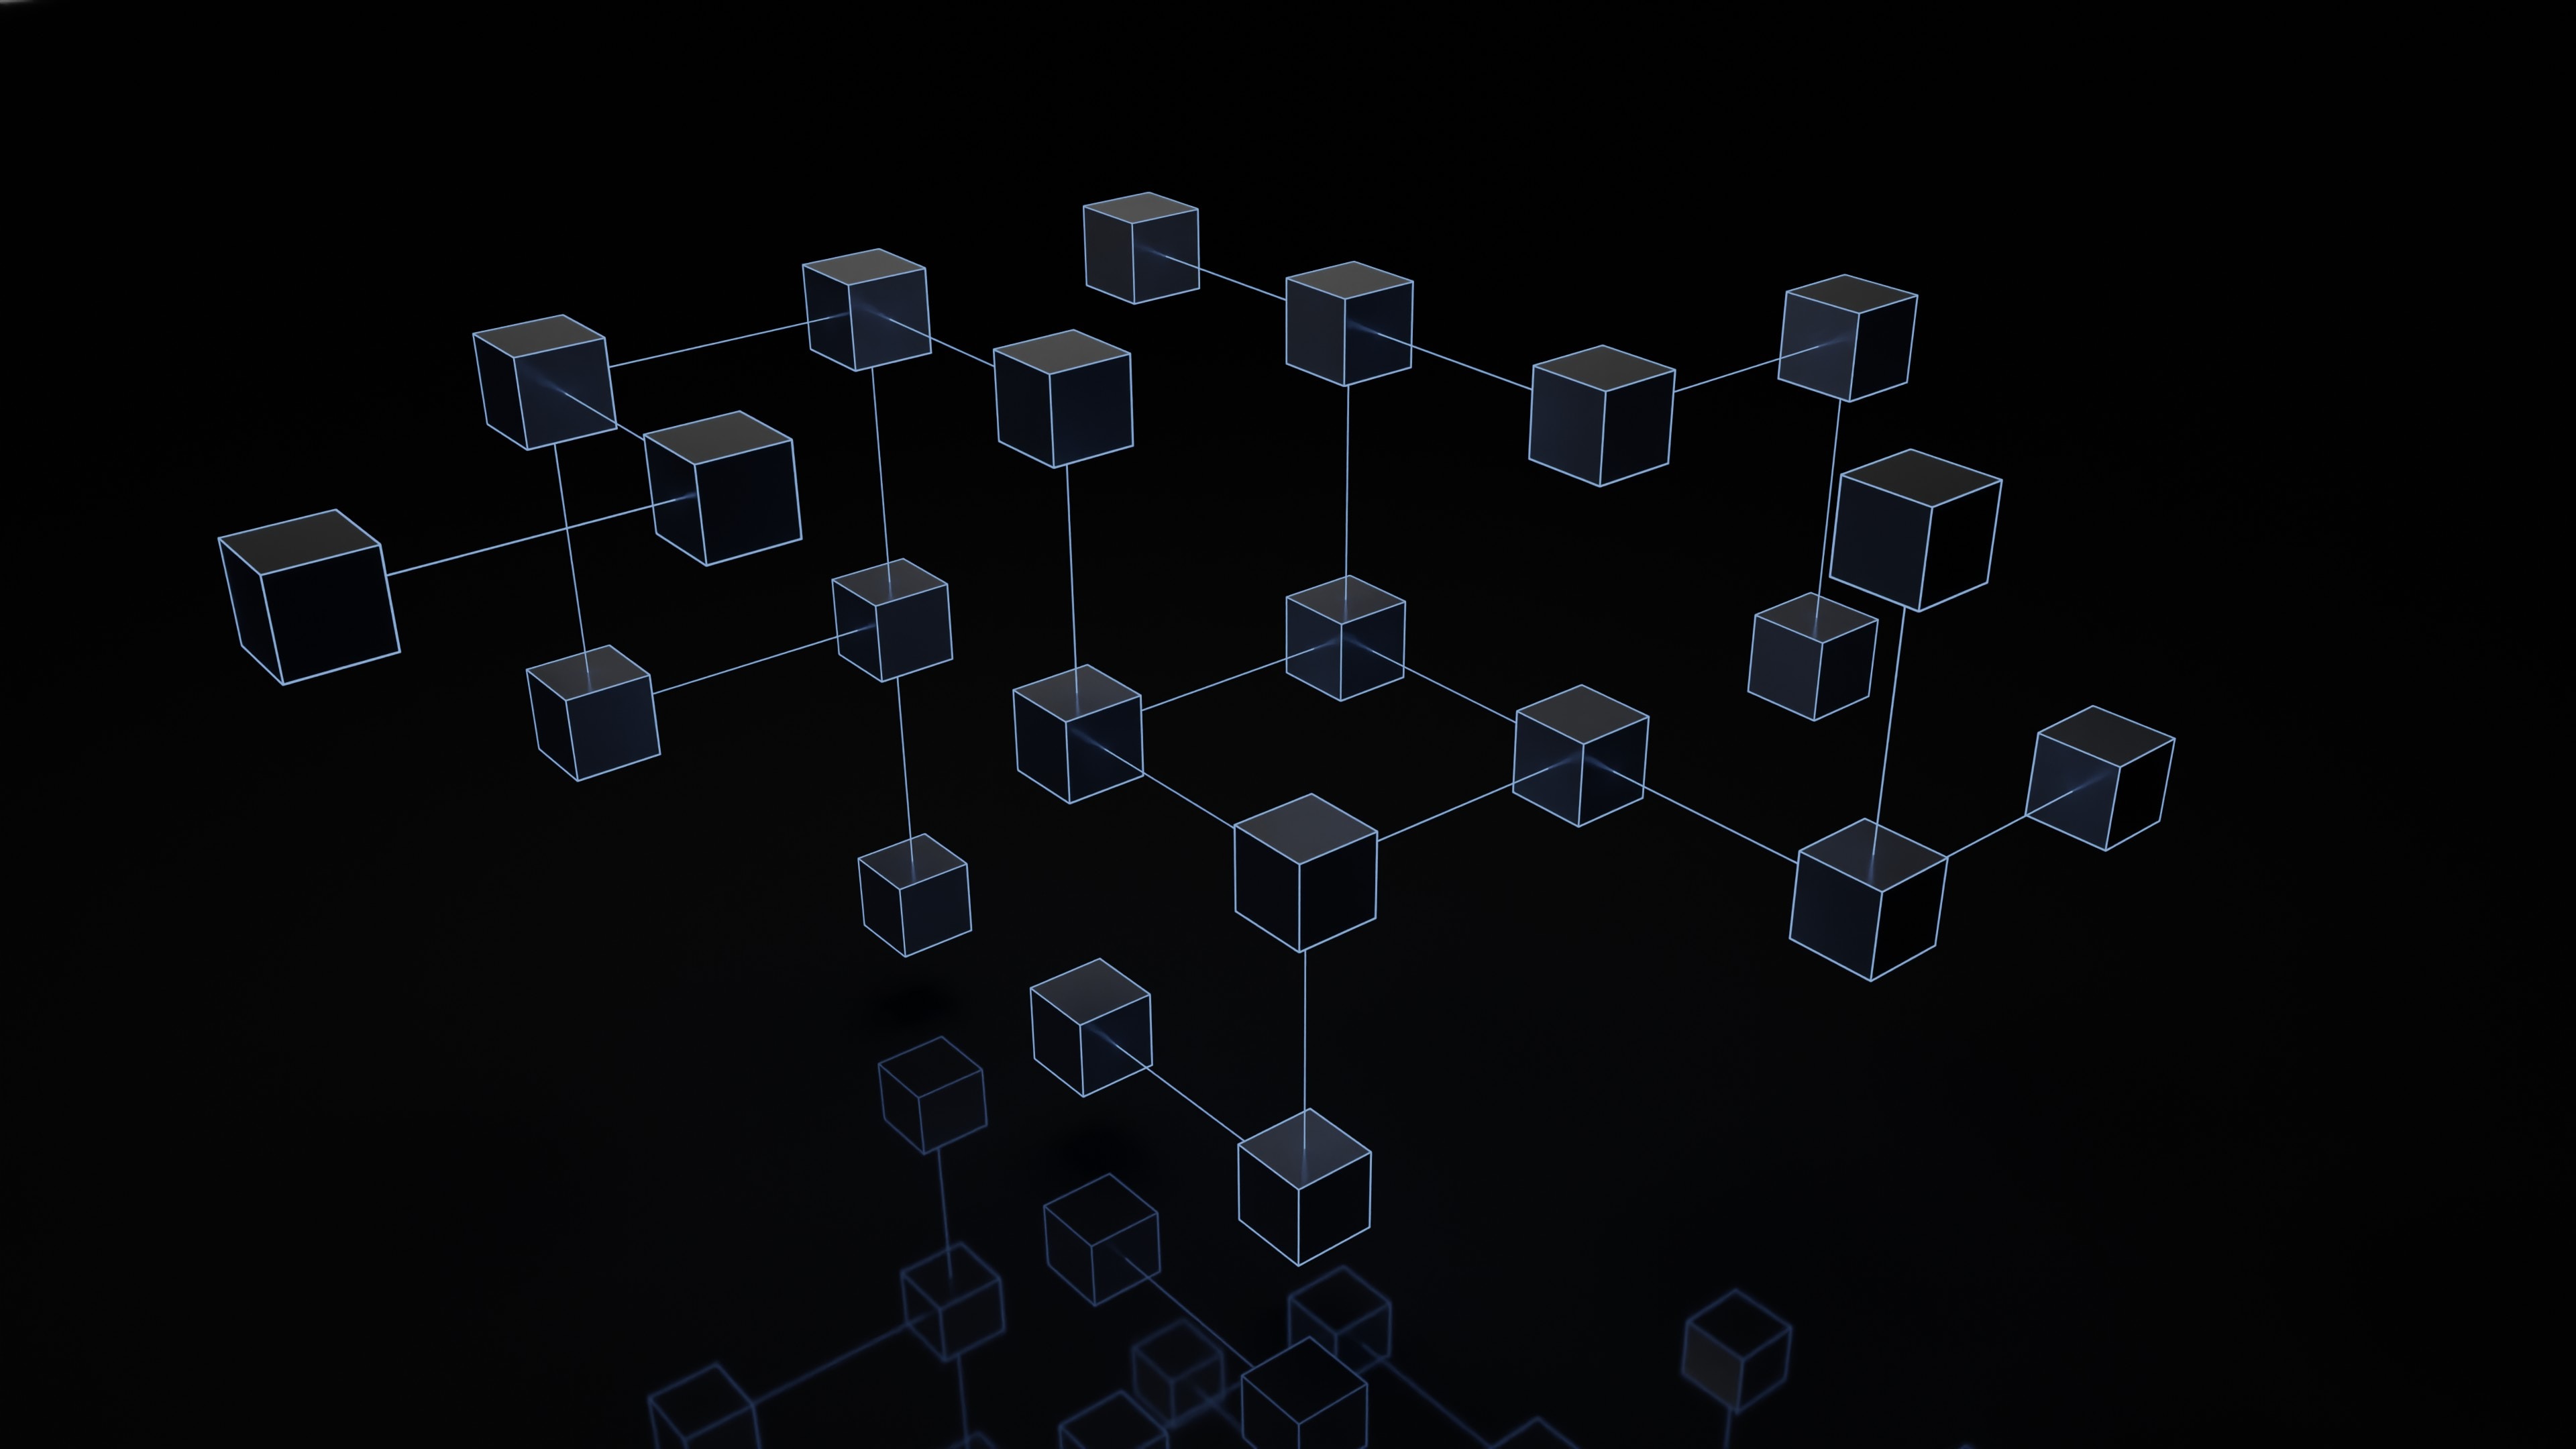 An interconnected web of cube.